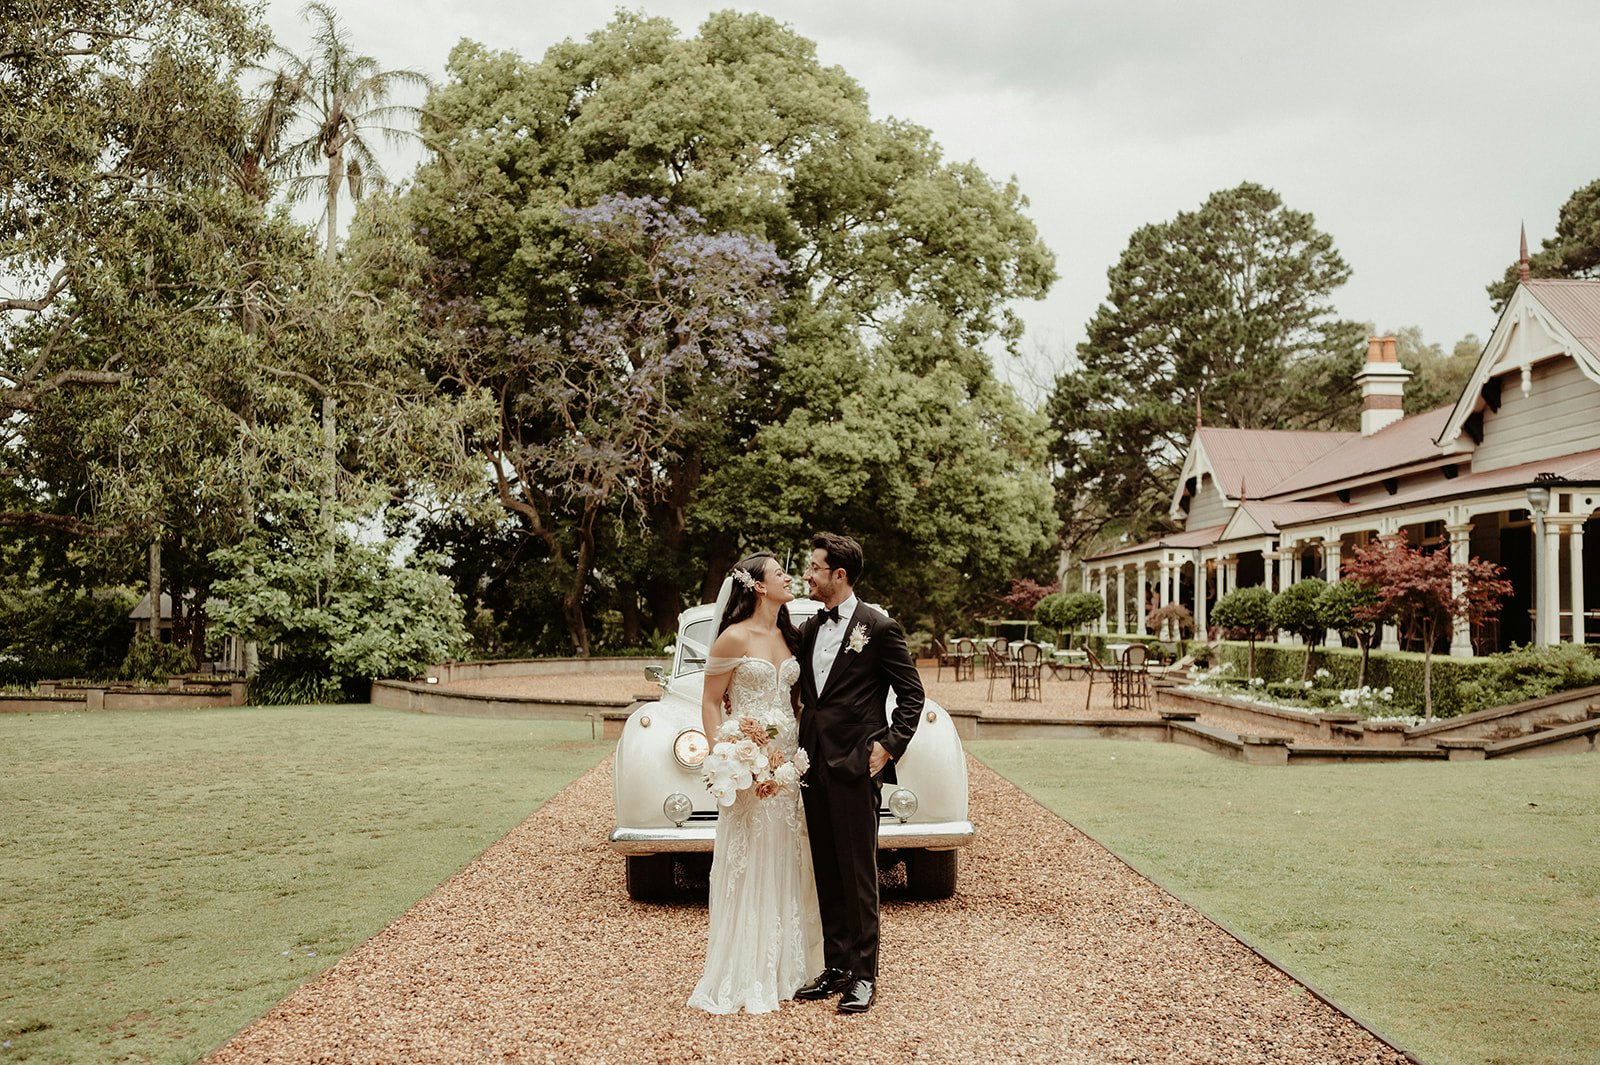 Bride and groom standing in front of car and homestead